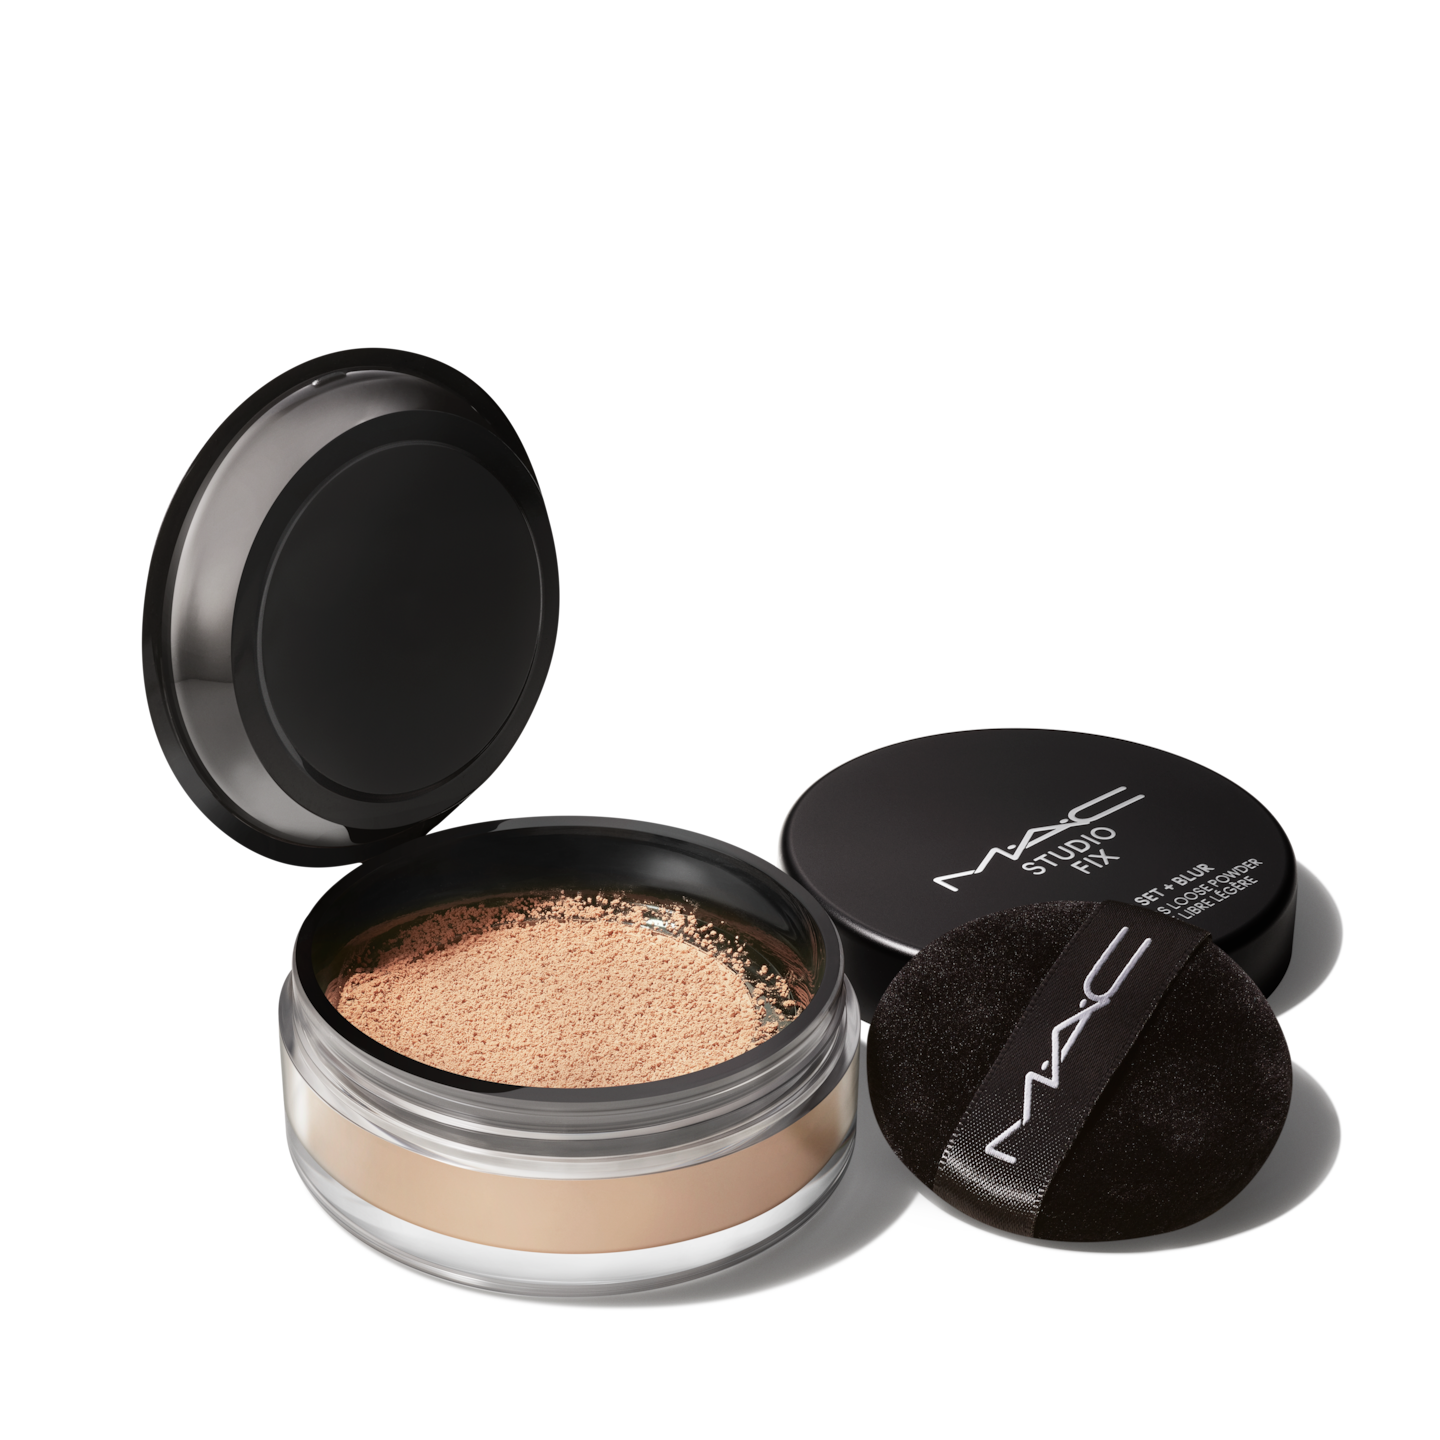 MAKE UP FOR EVER SUPER MATTE LOOSE POWDER: REVIEW AND PICTURES